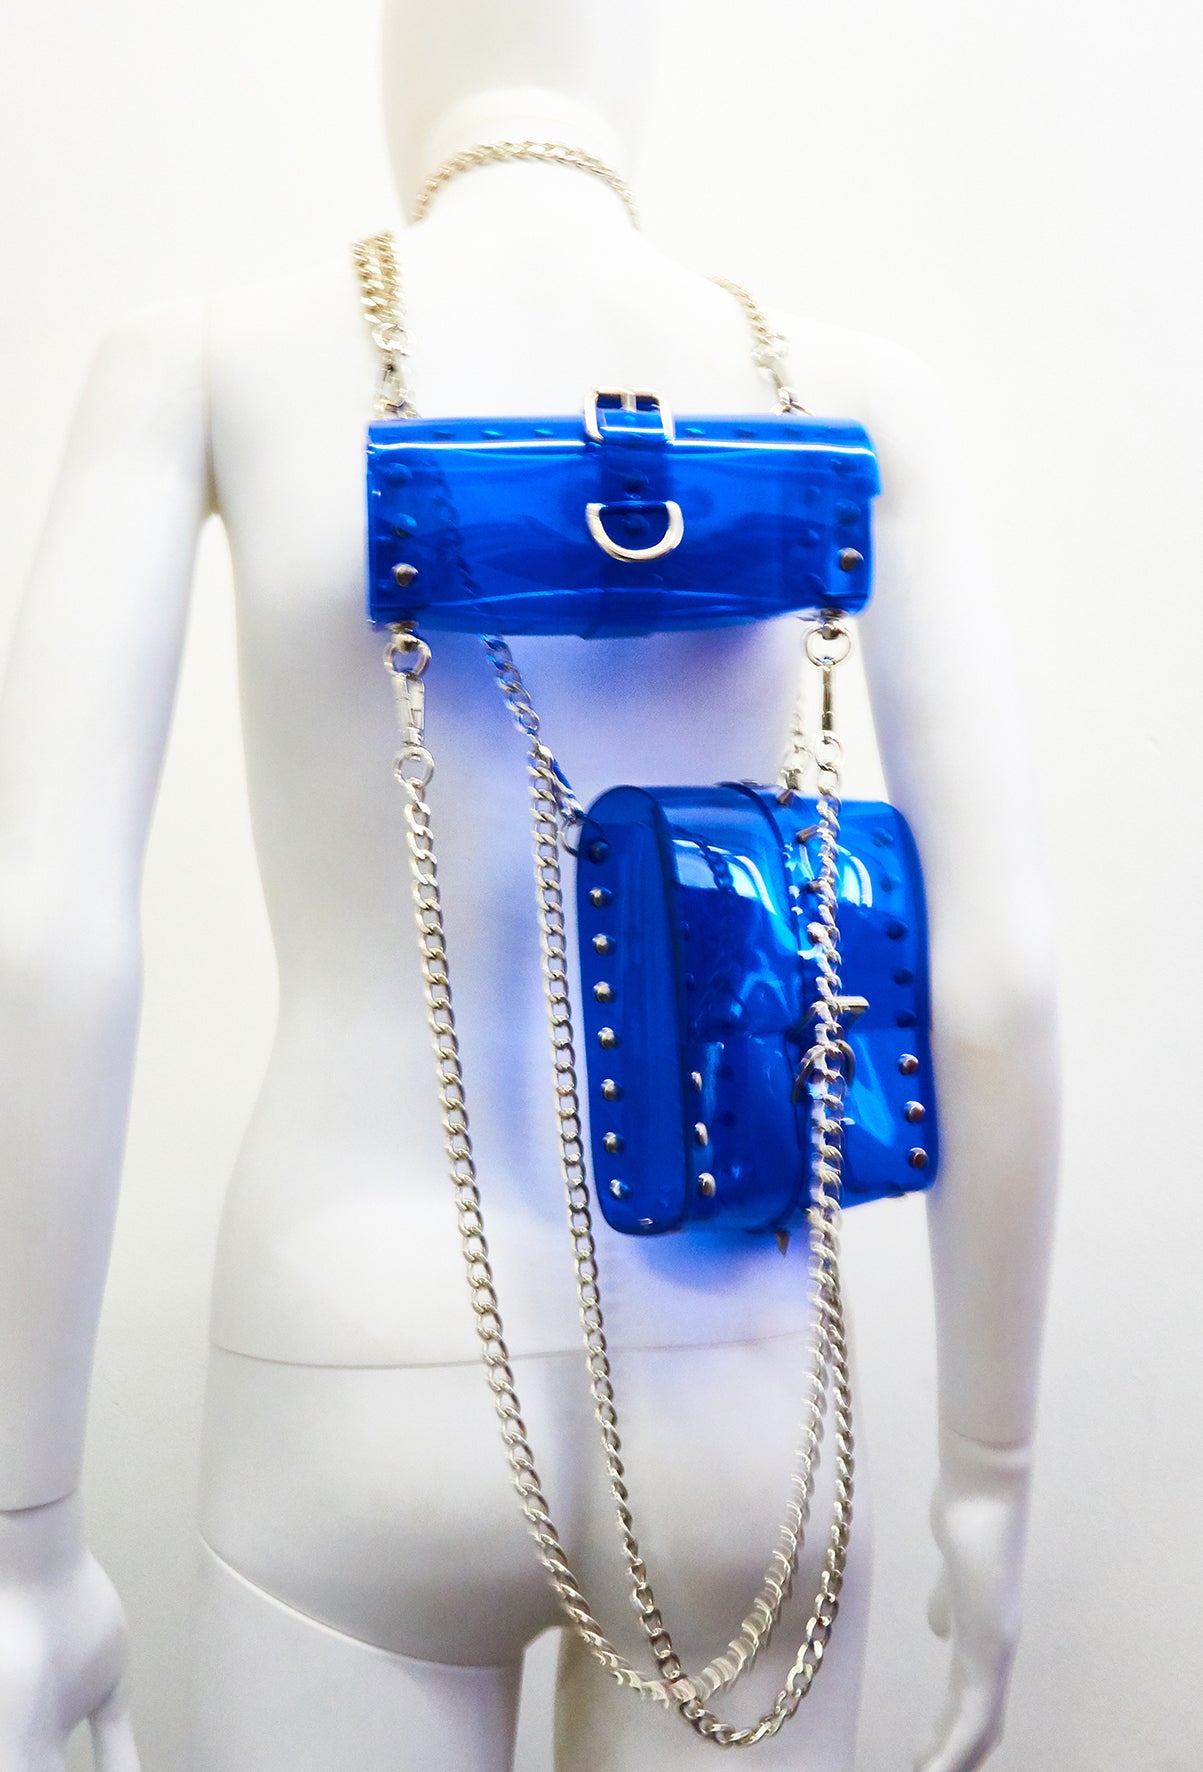 Jivomir Domoustchiev The Dream Collector Transparent blueJivomir Domoustchiev The Dream Collector Bag clear red vegan vinyl studded chain purse collectible handbag